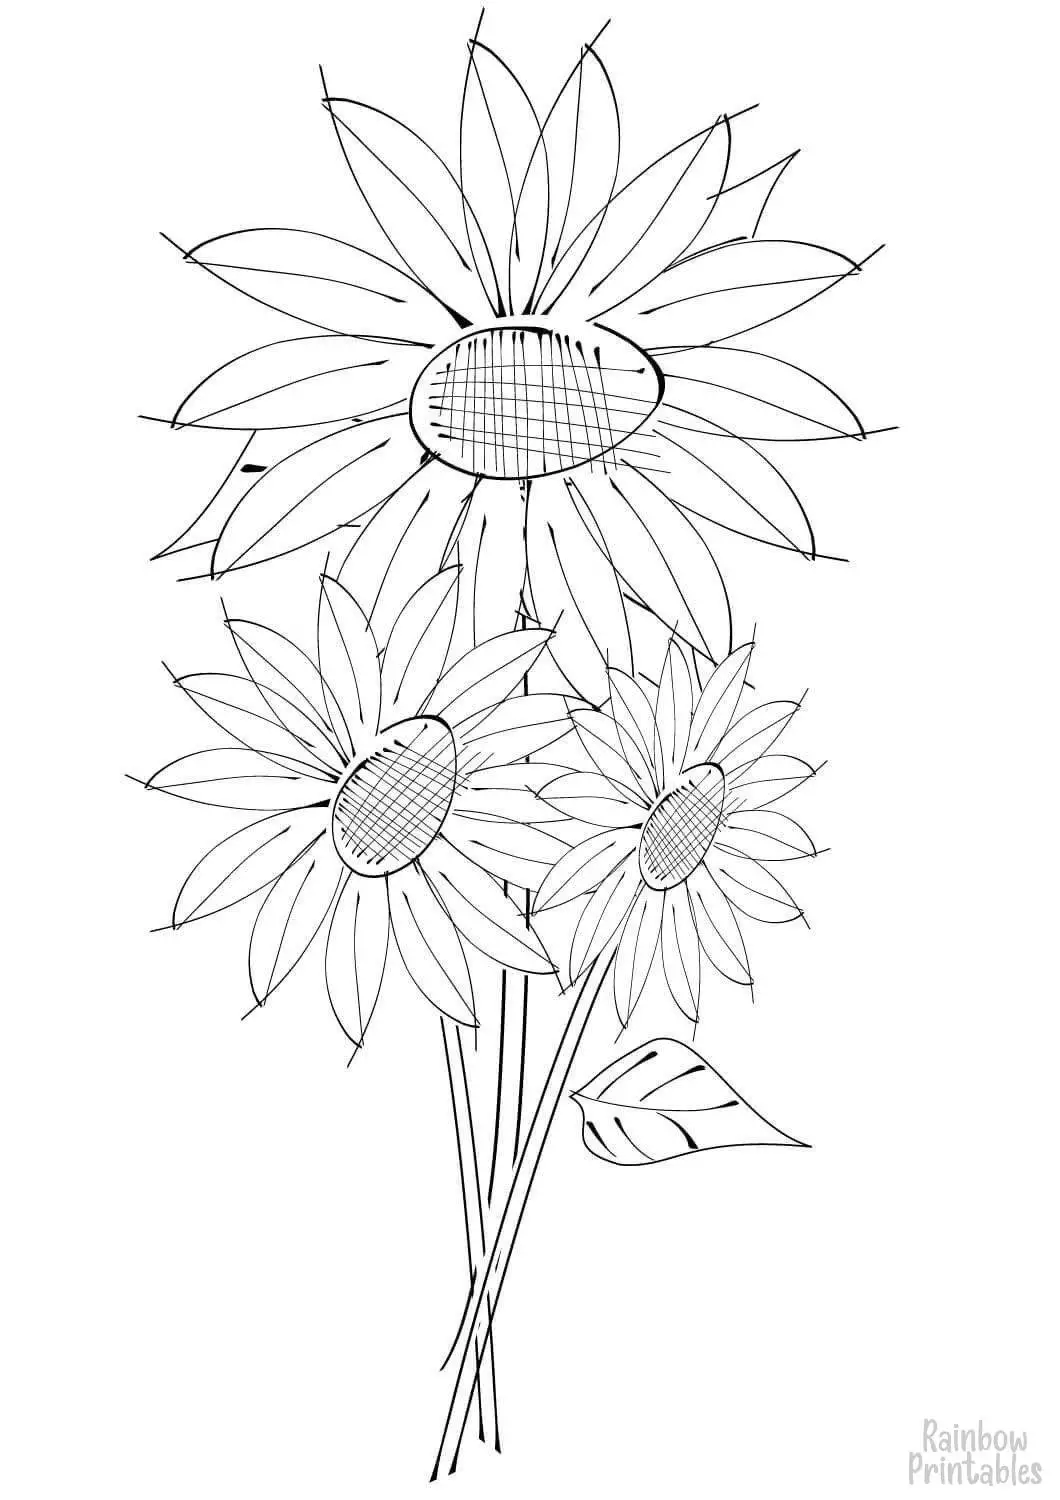 SIMPLE-EASY-line-drawings-SUNFLOWER-coloring-page-for-kids Outline